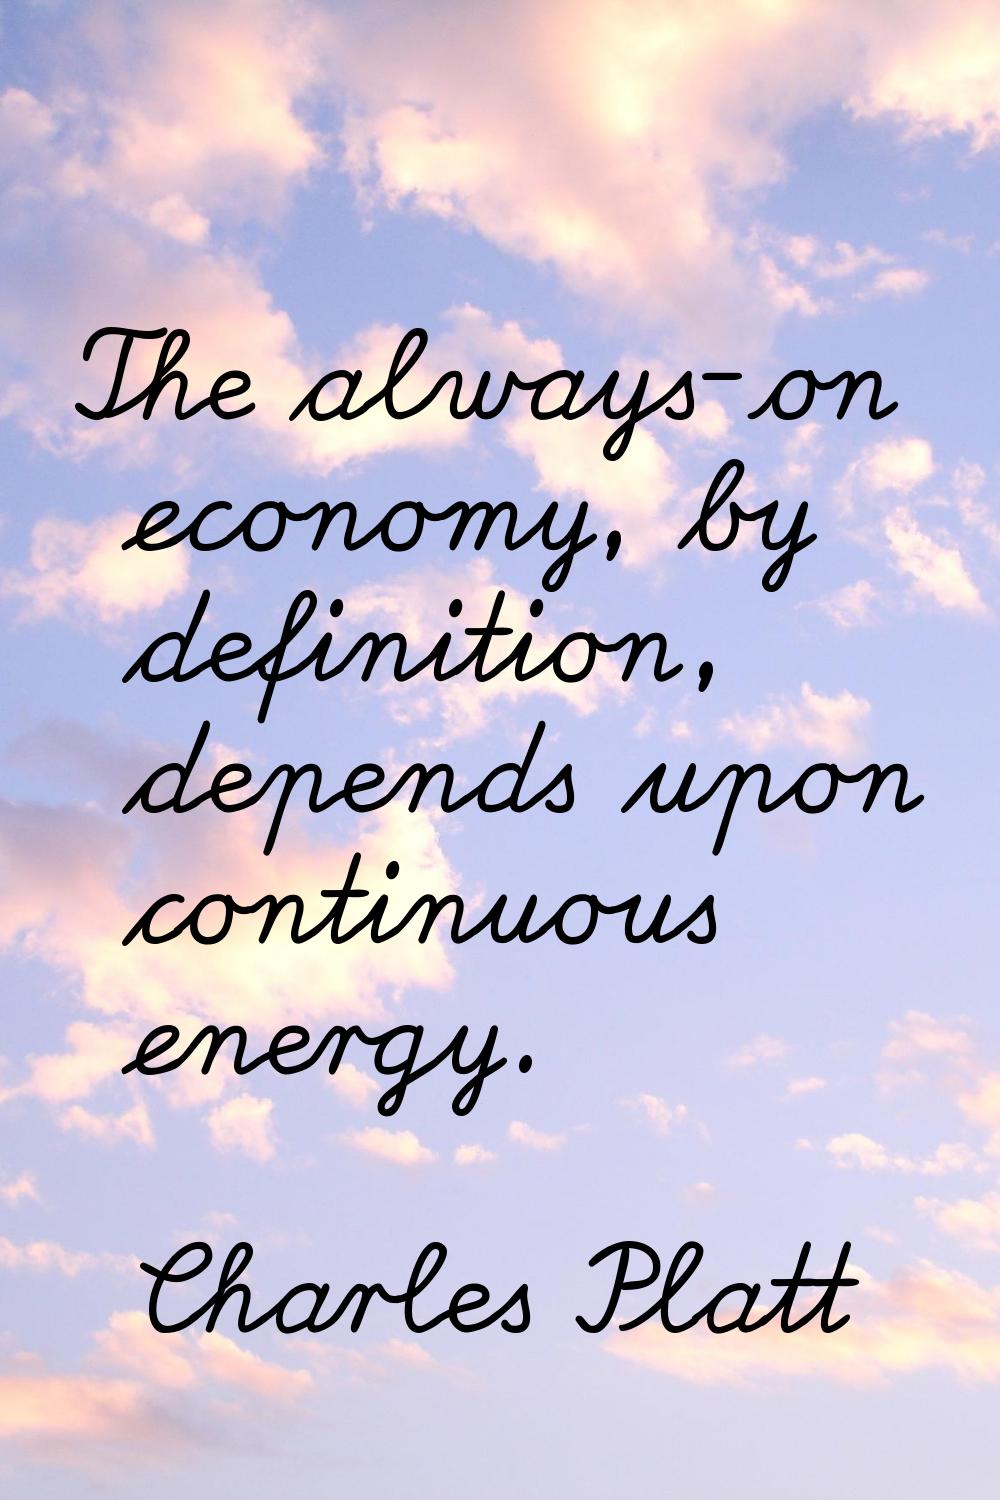 The always-on economy, by definition, depends upon continuous energy.